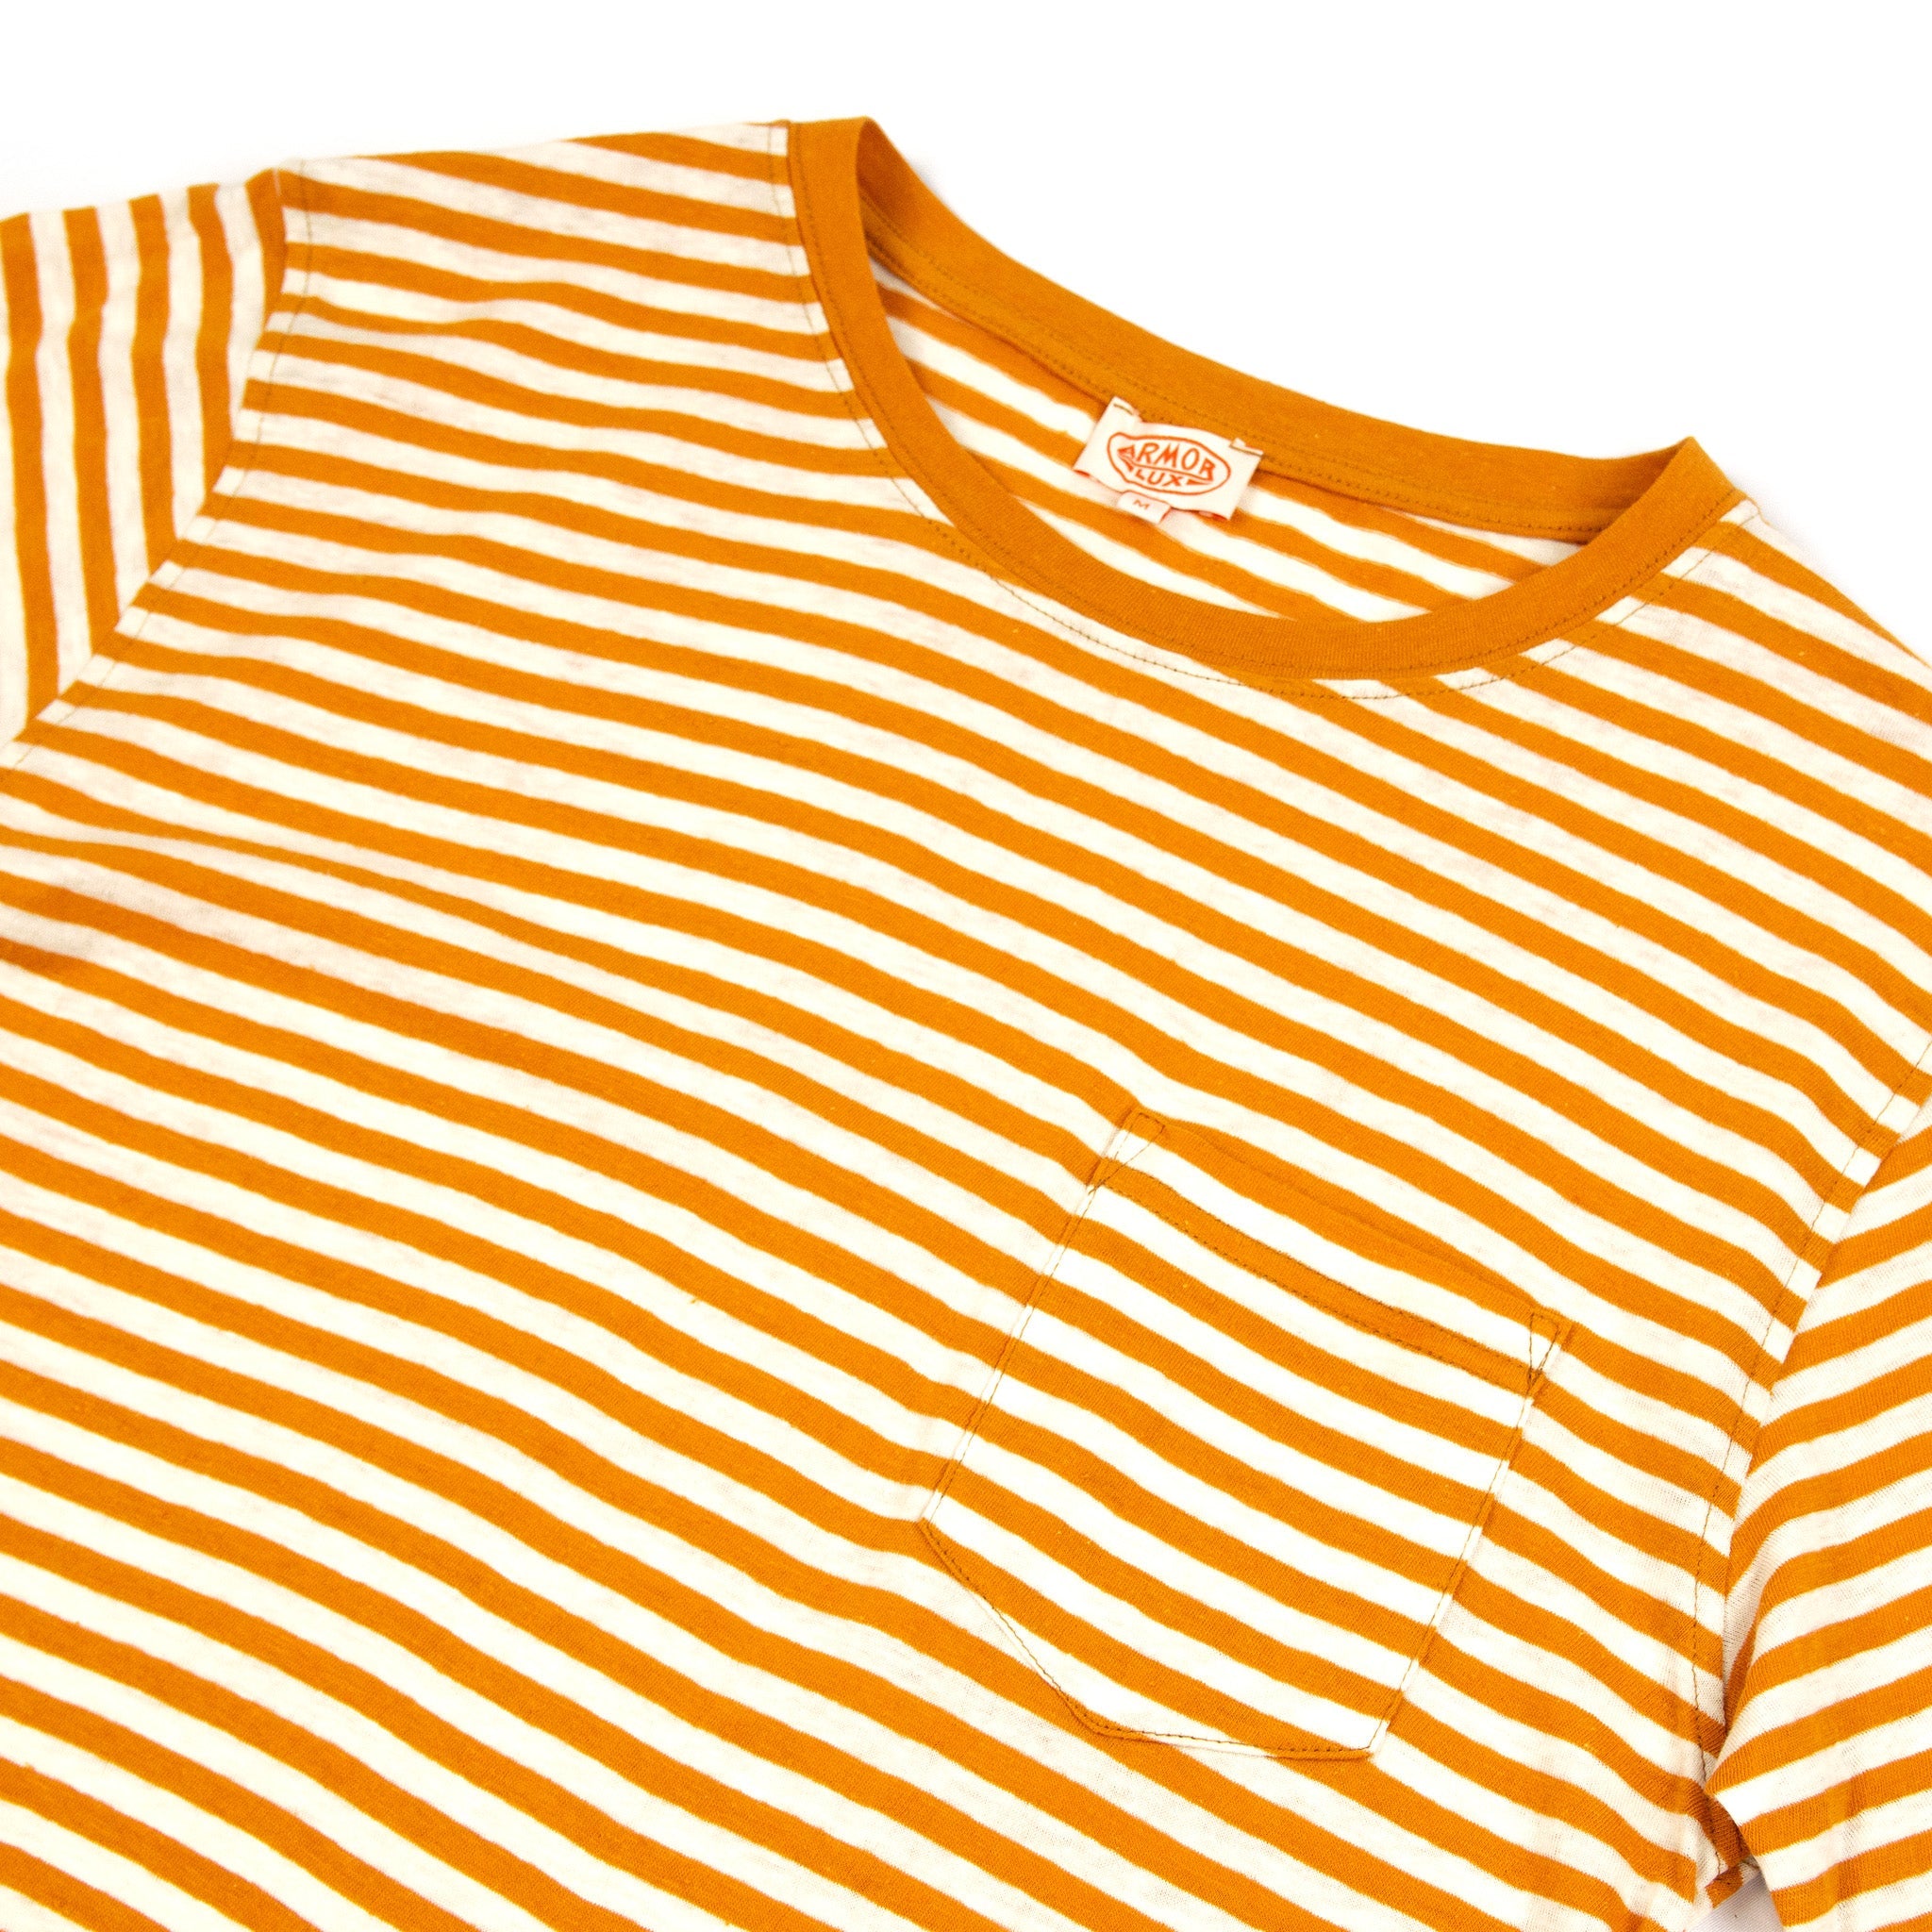 CLOSE UP OF STRIPED T-SHIRT